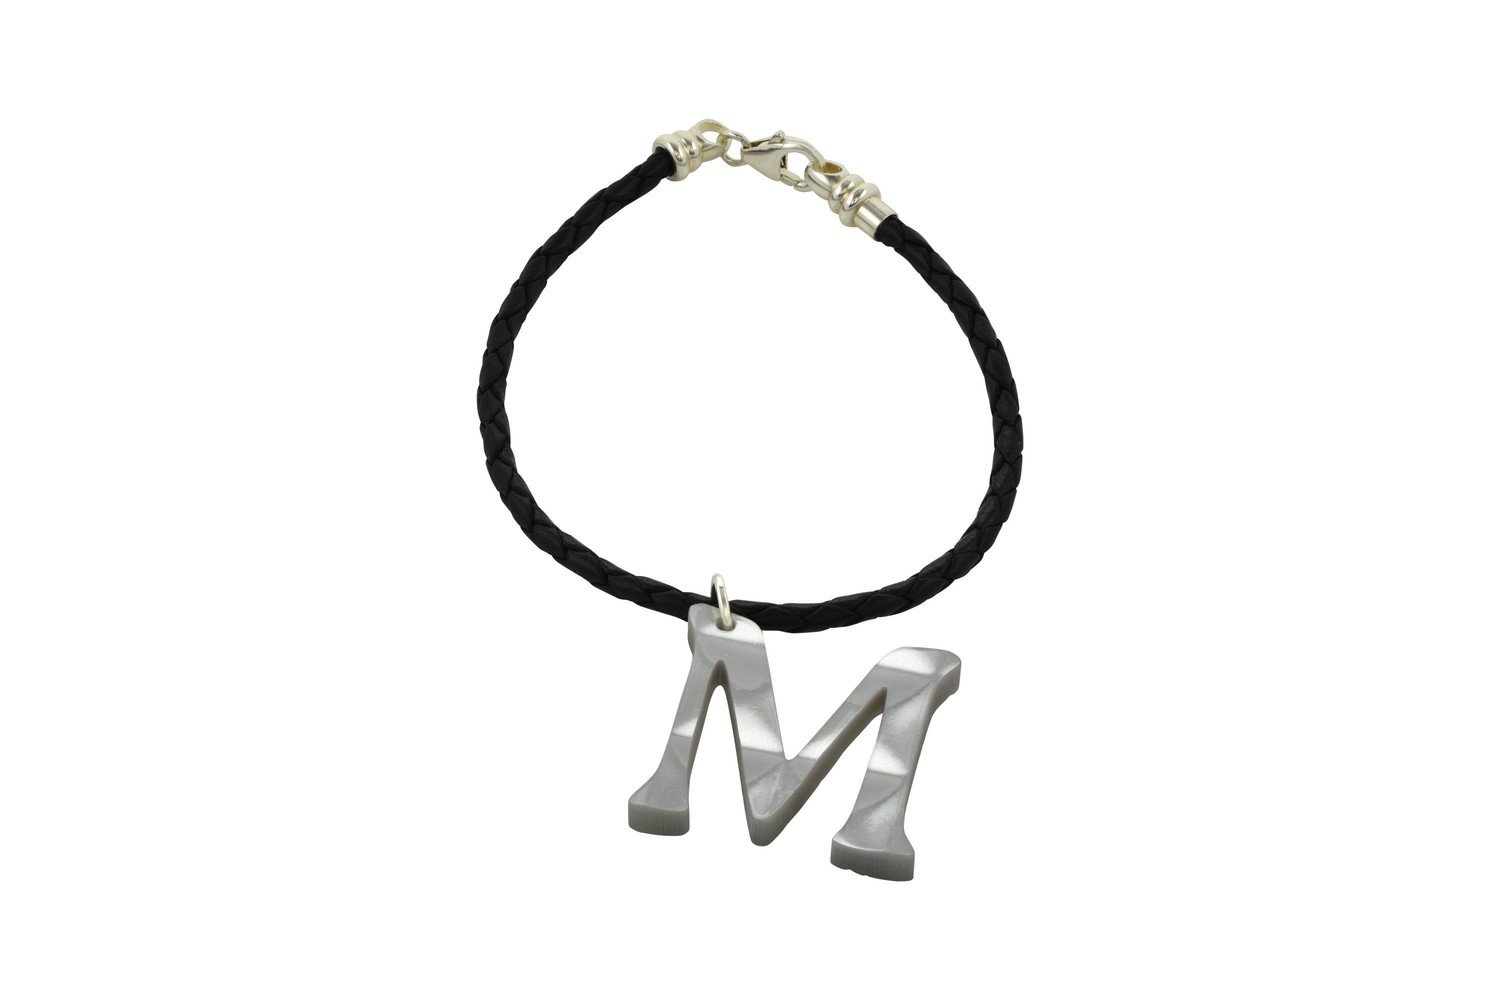 Sculpted Alphabet Charm with Decorative Braided Leather Cord Bracelet